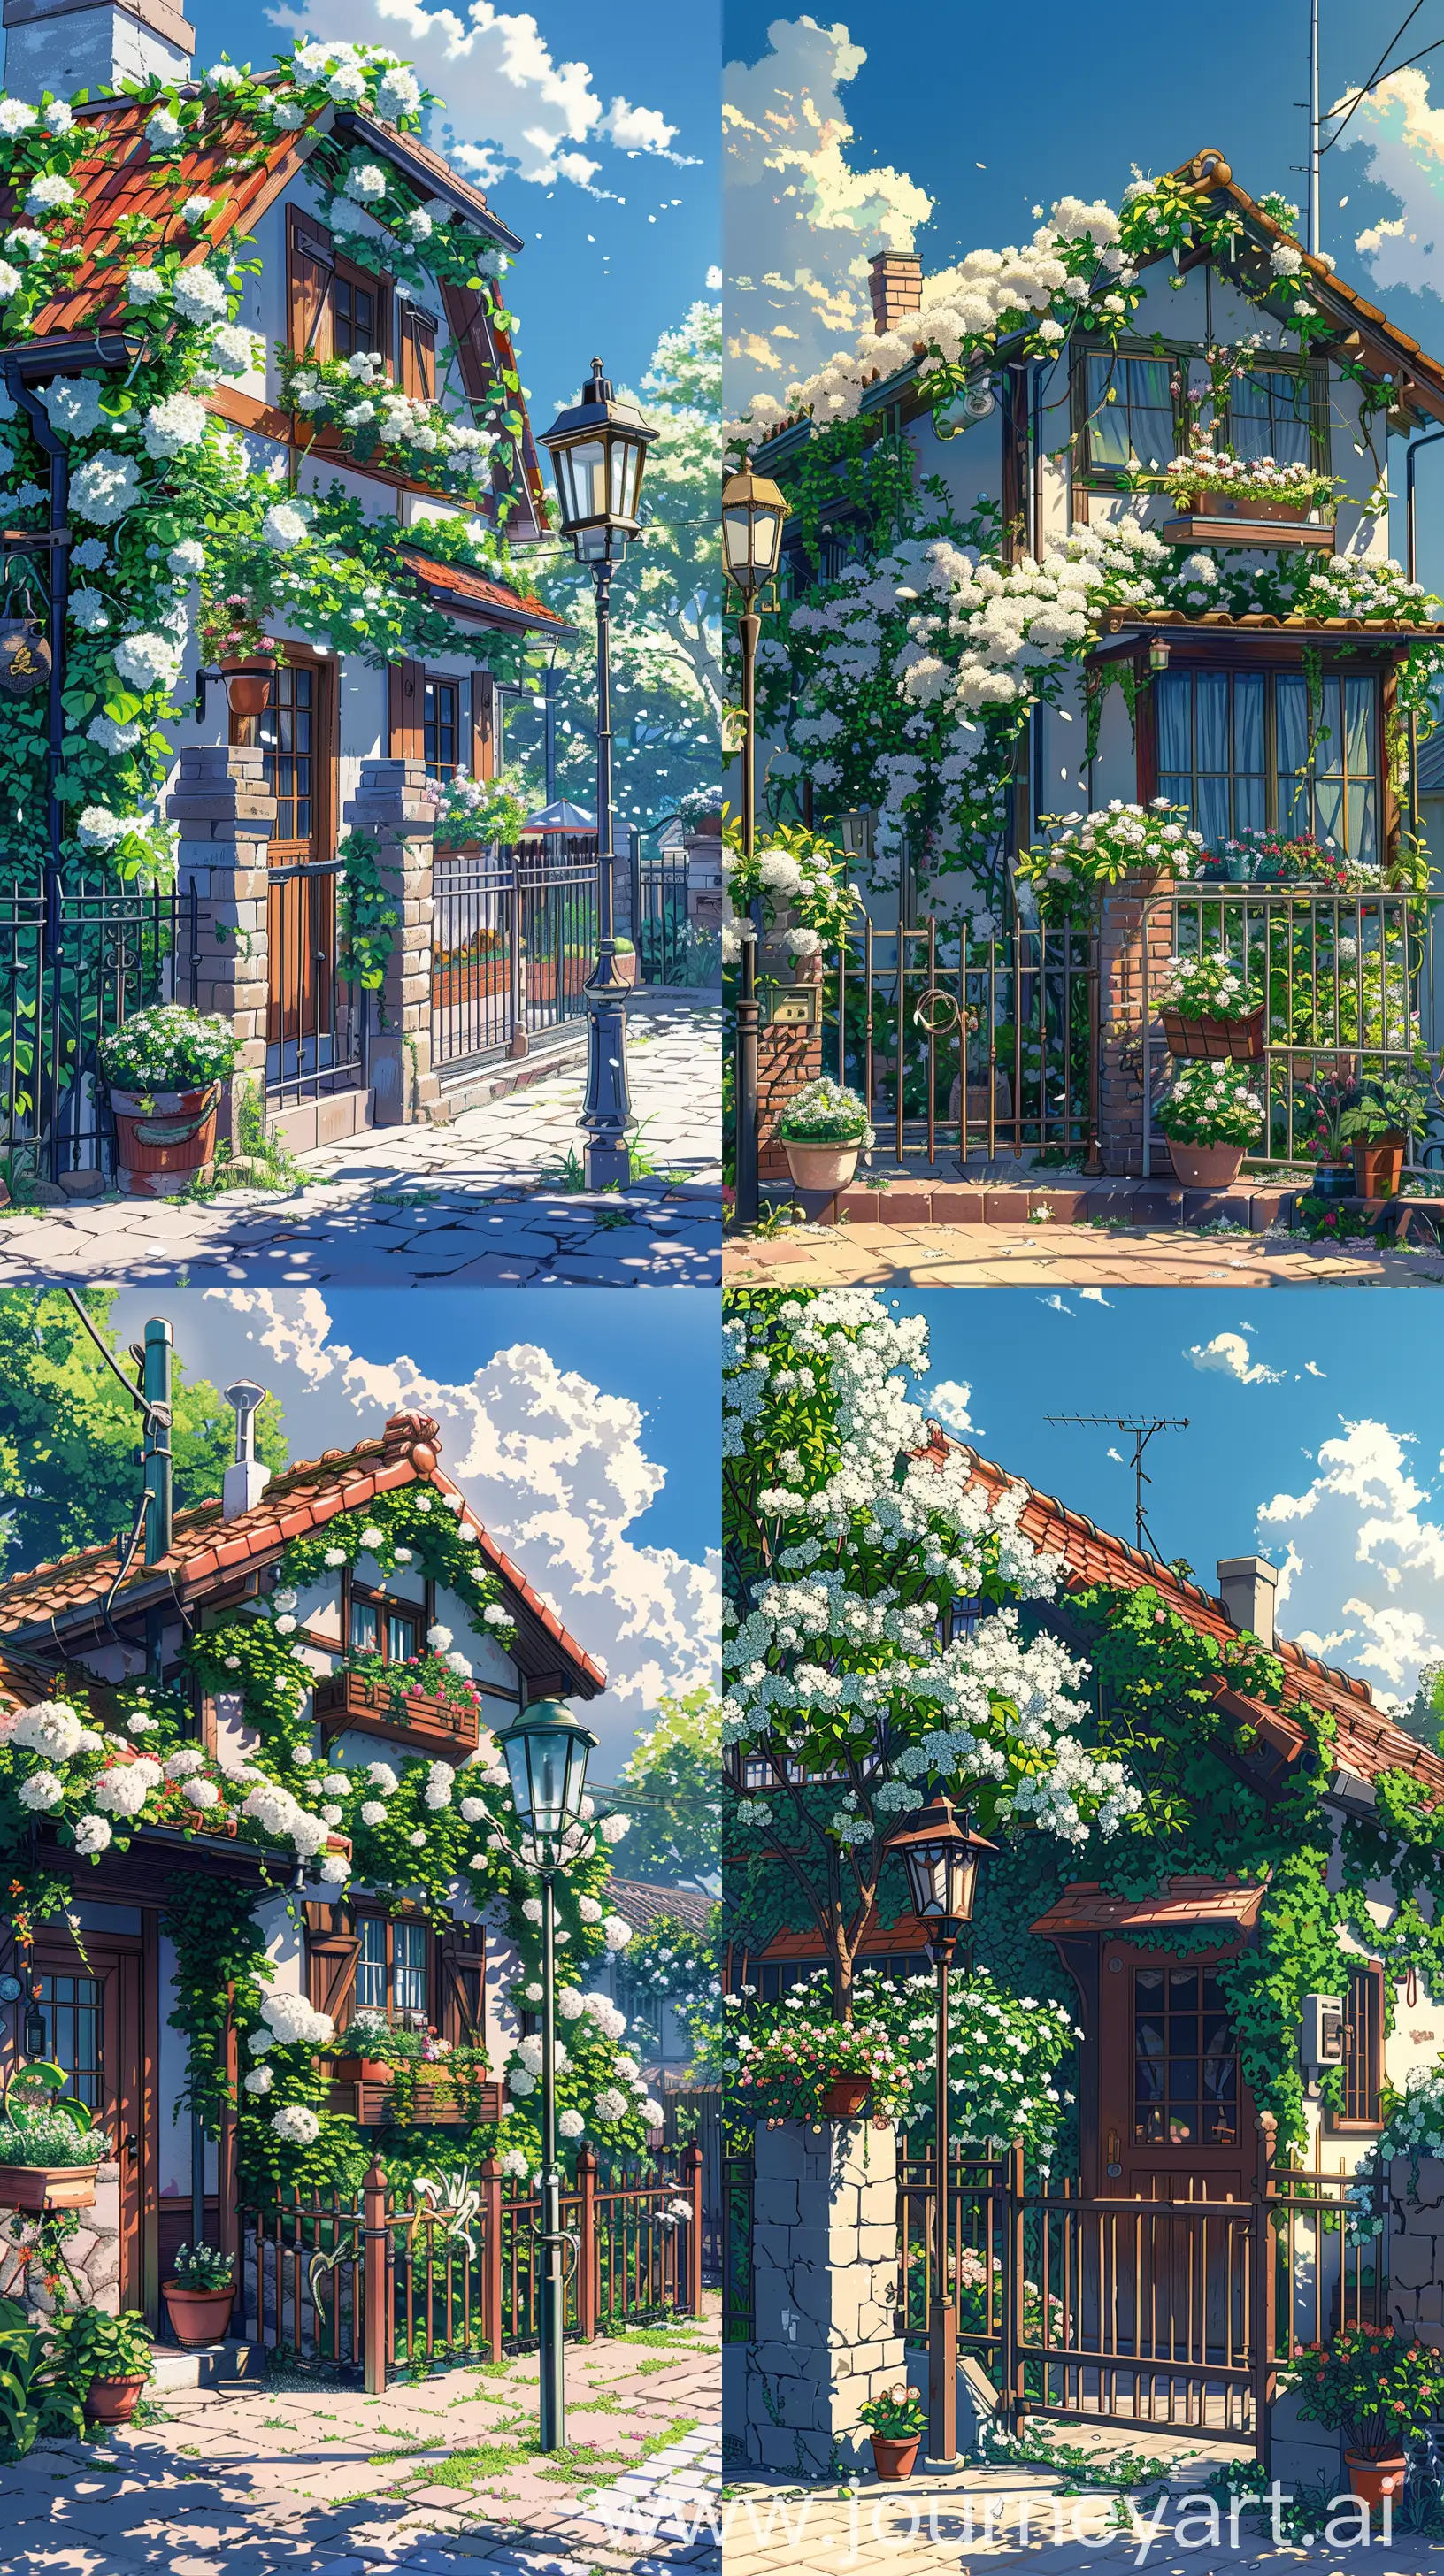 Anime scenary, illustration, mokoto shinkai and Ghibli style mix, front facade view small house, fence, sunny day, spring time, white colour flowers, anime scenary, house decoration with flowers, flower pot, beautiful ivy and flowers decoration lamp post, High quality, HD, no hyperrealistic --ar 9:16 --s 400